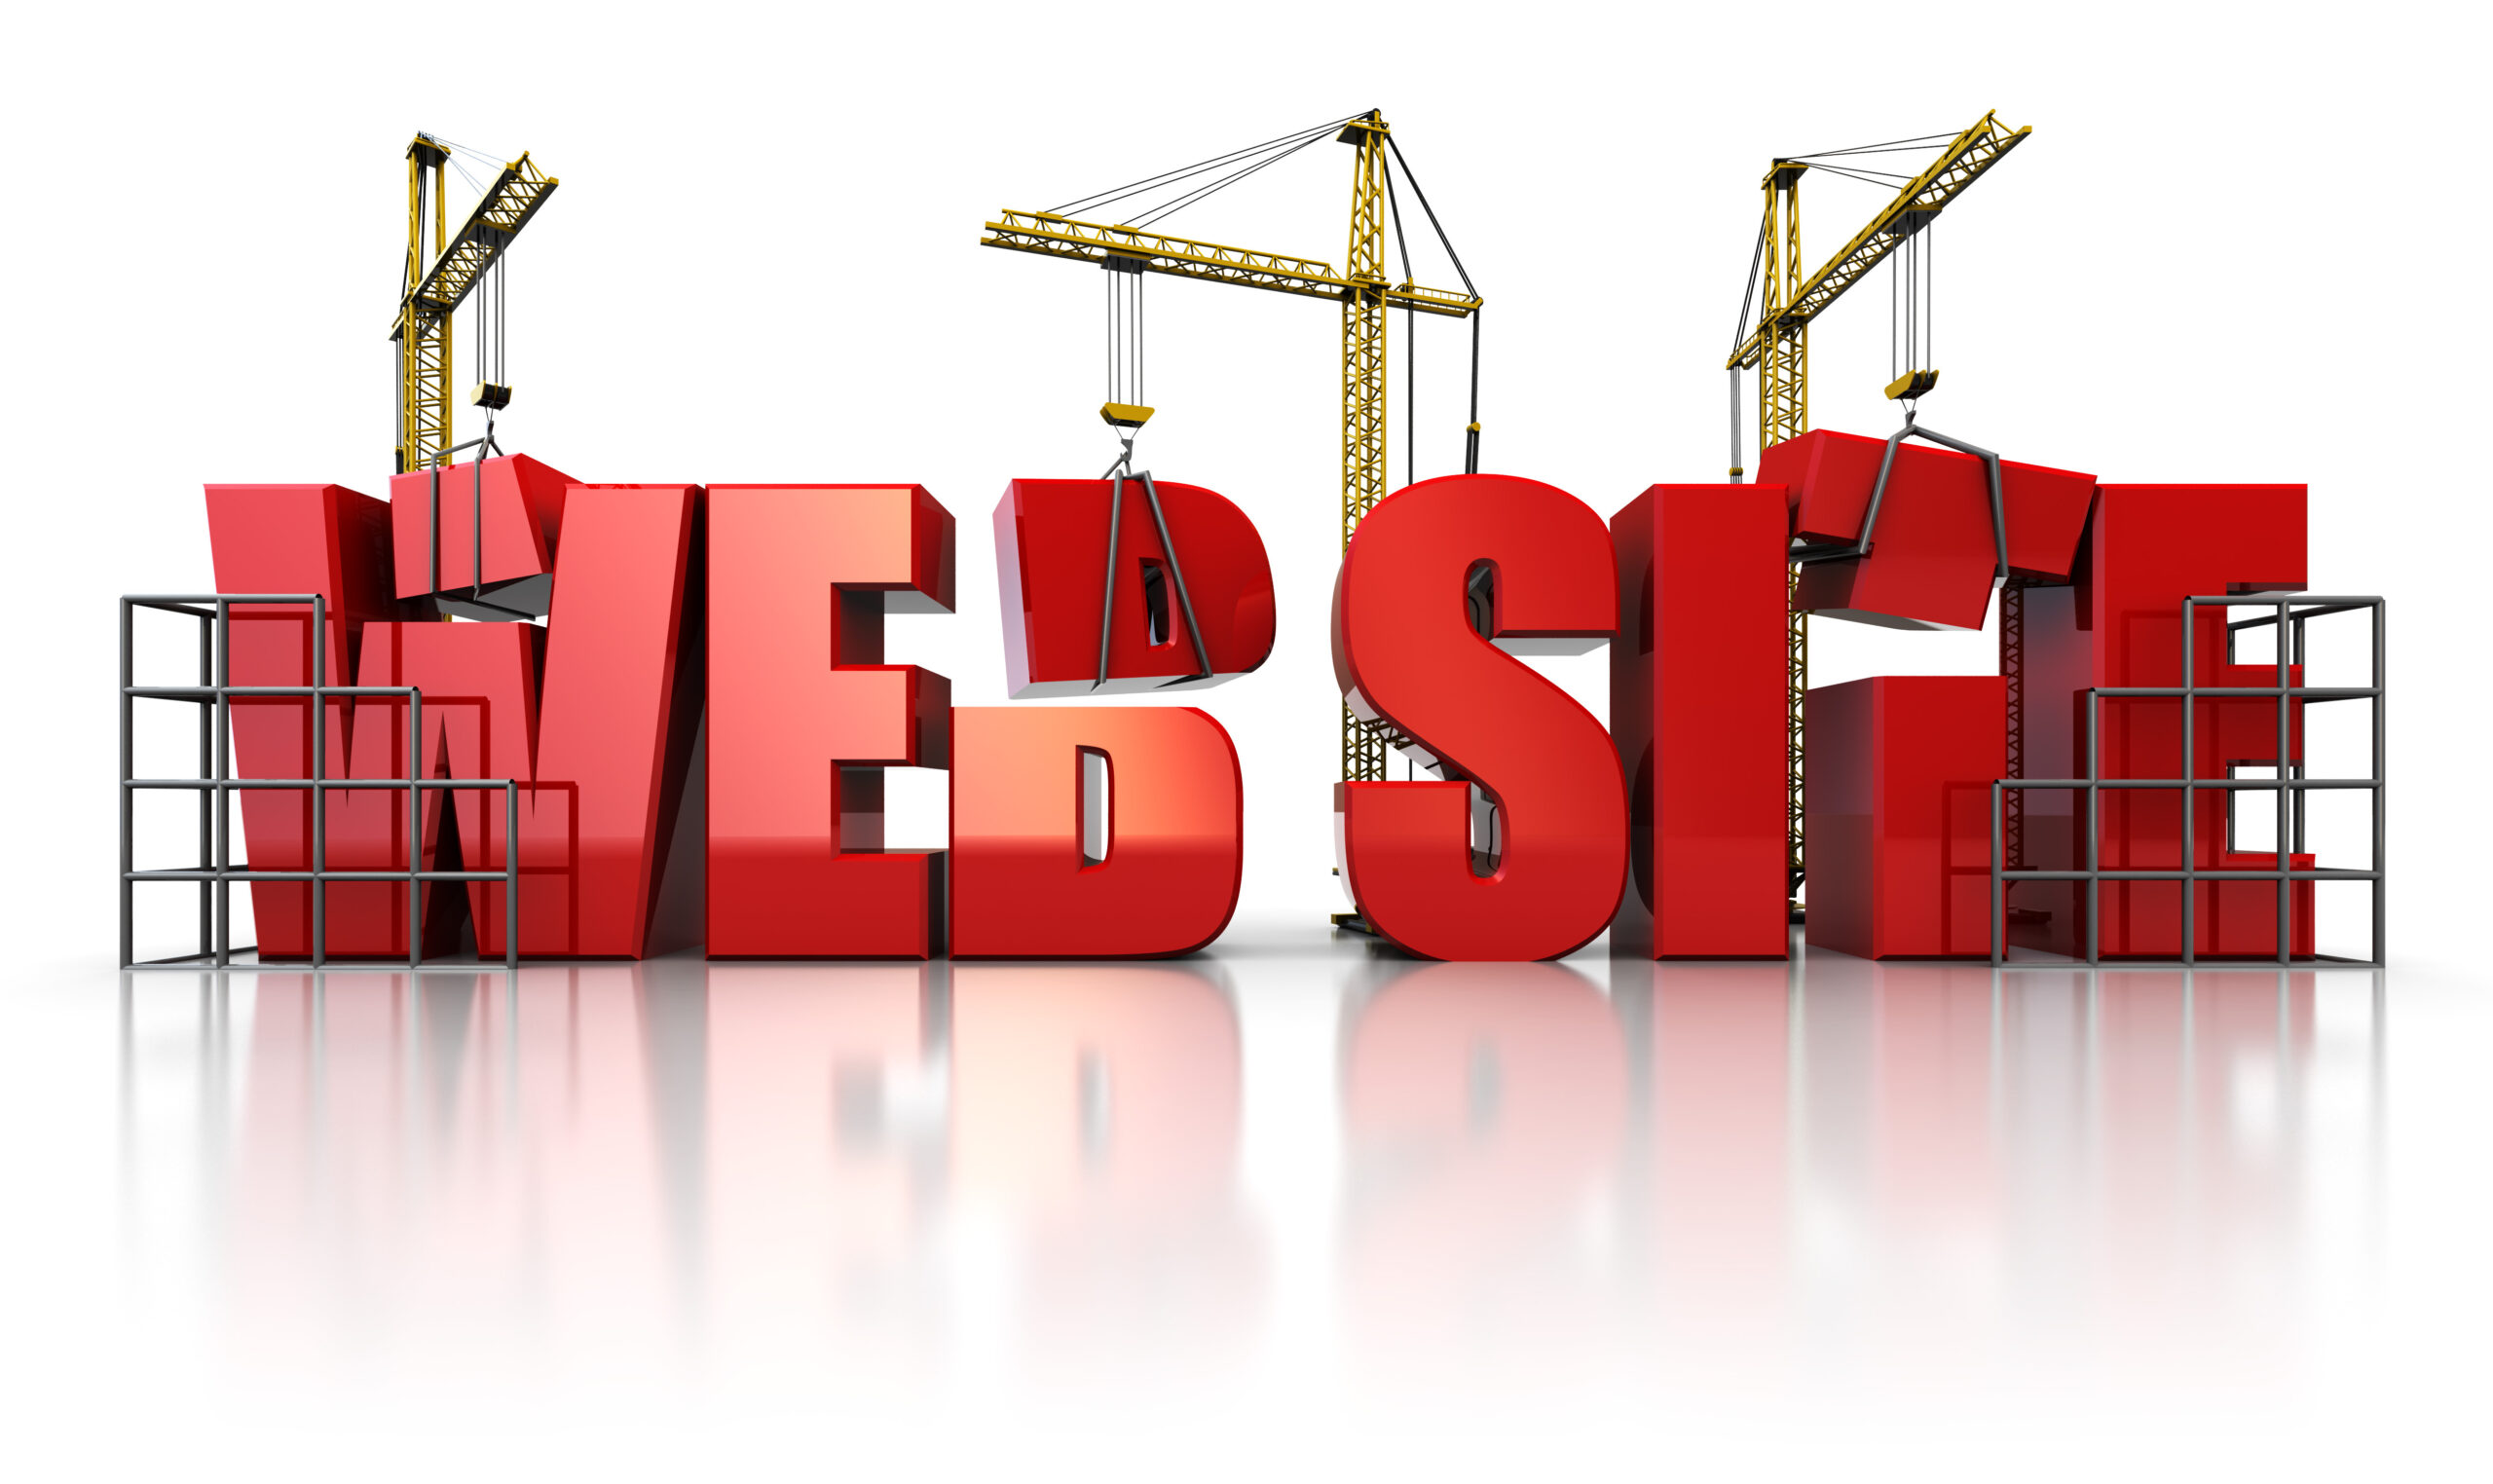 3d illustration of three cranes building text 'web site' over white background